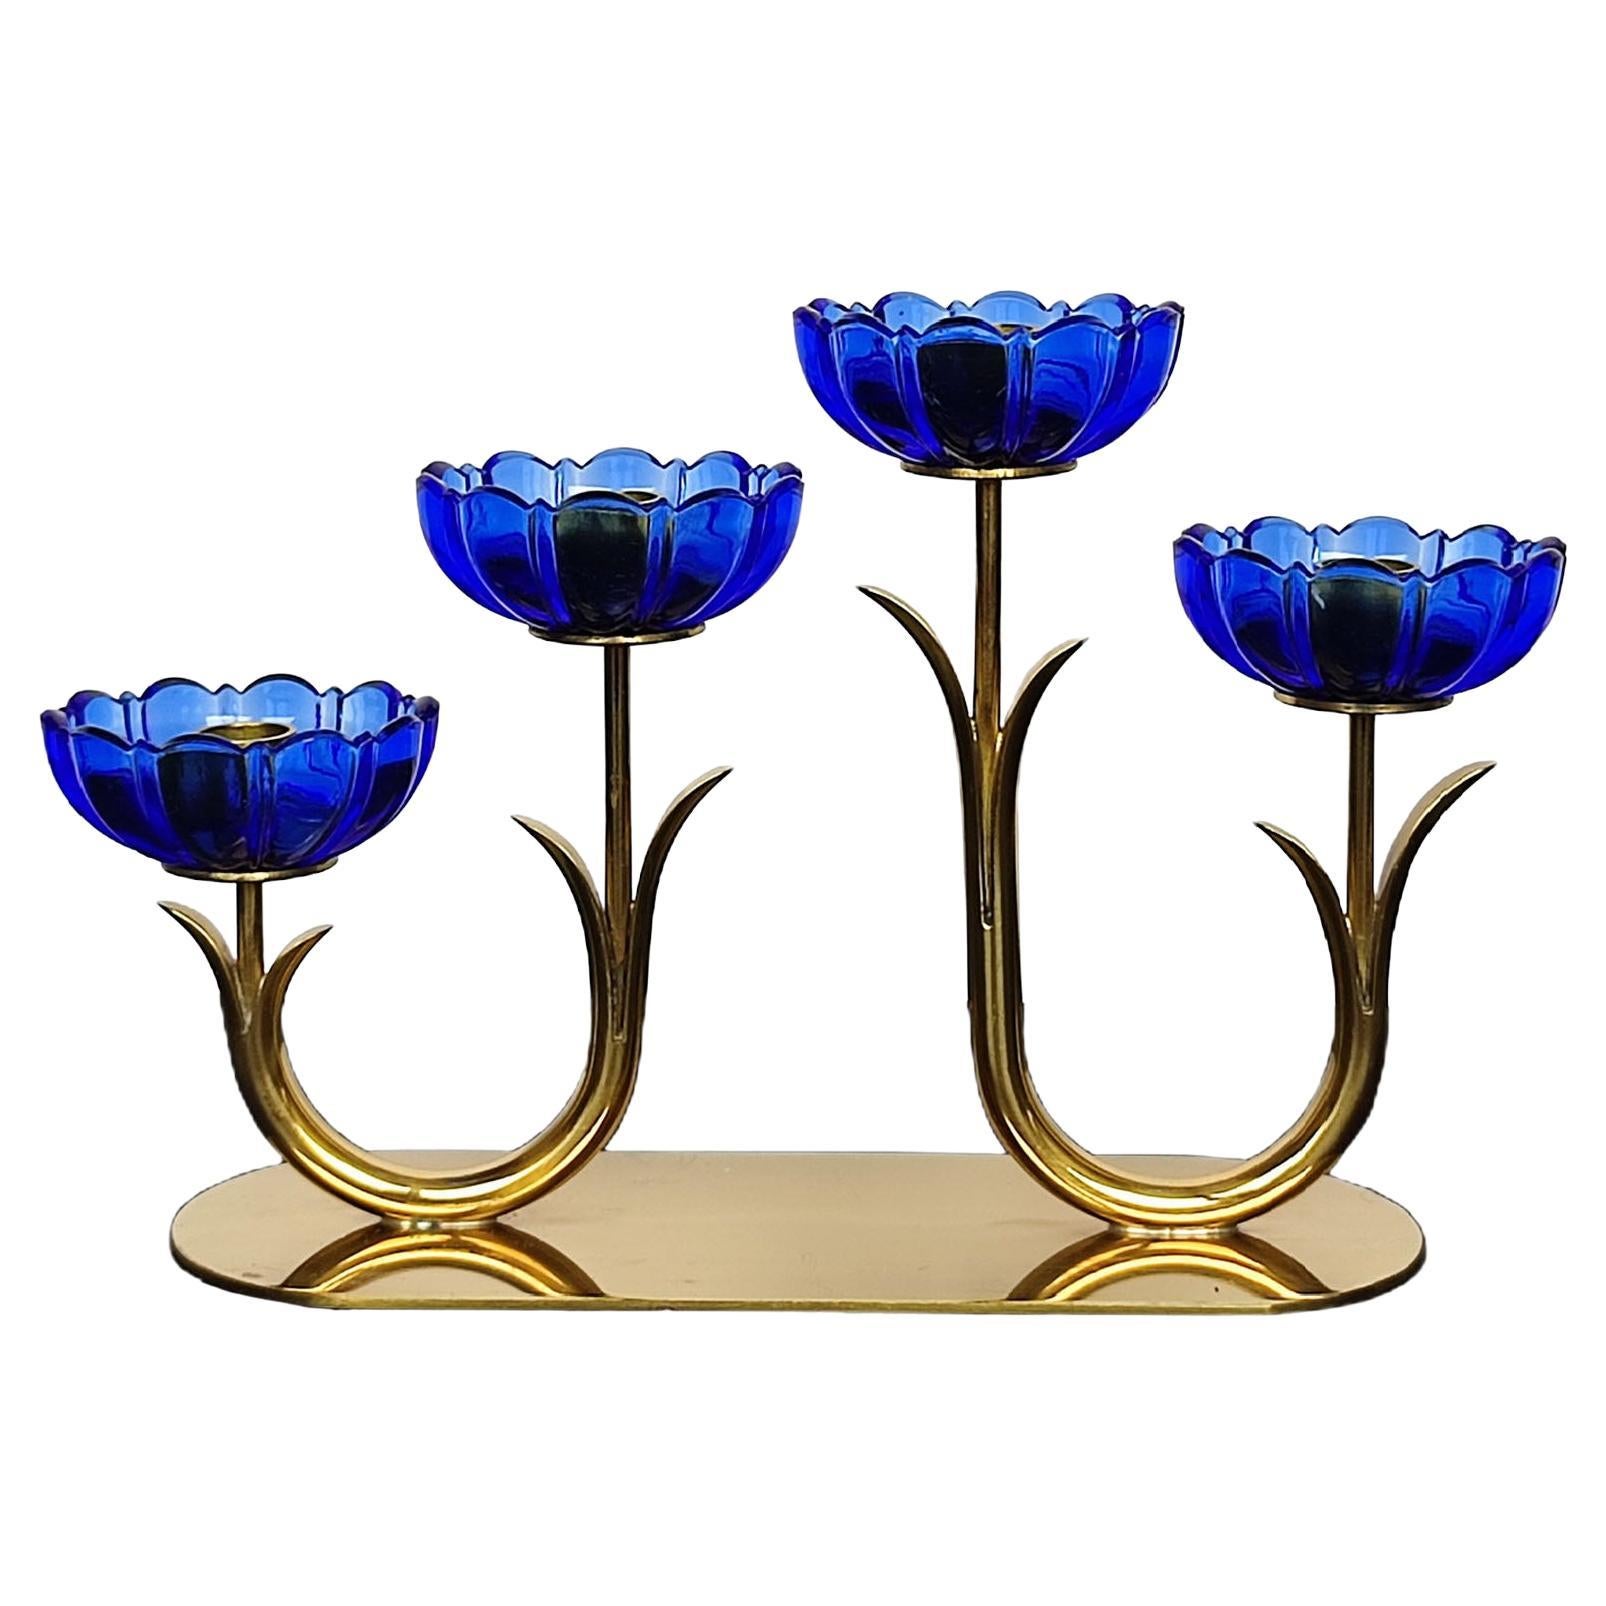 Gunnar Ander for Ystad Metall, Candlestick in Brass and Blue Art Glass